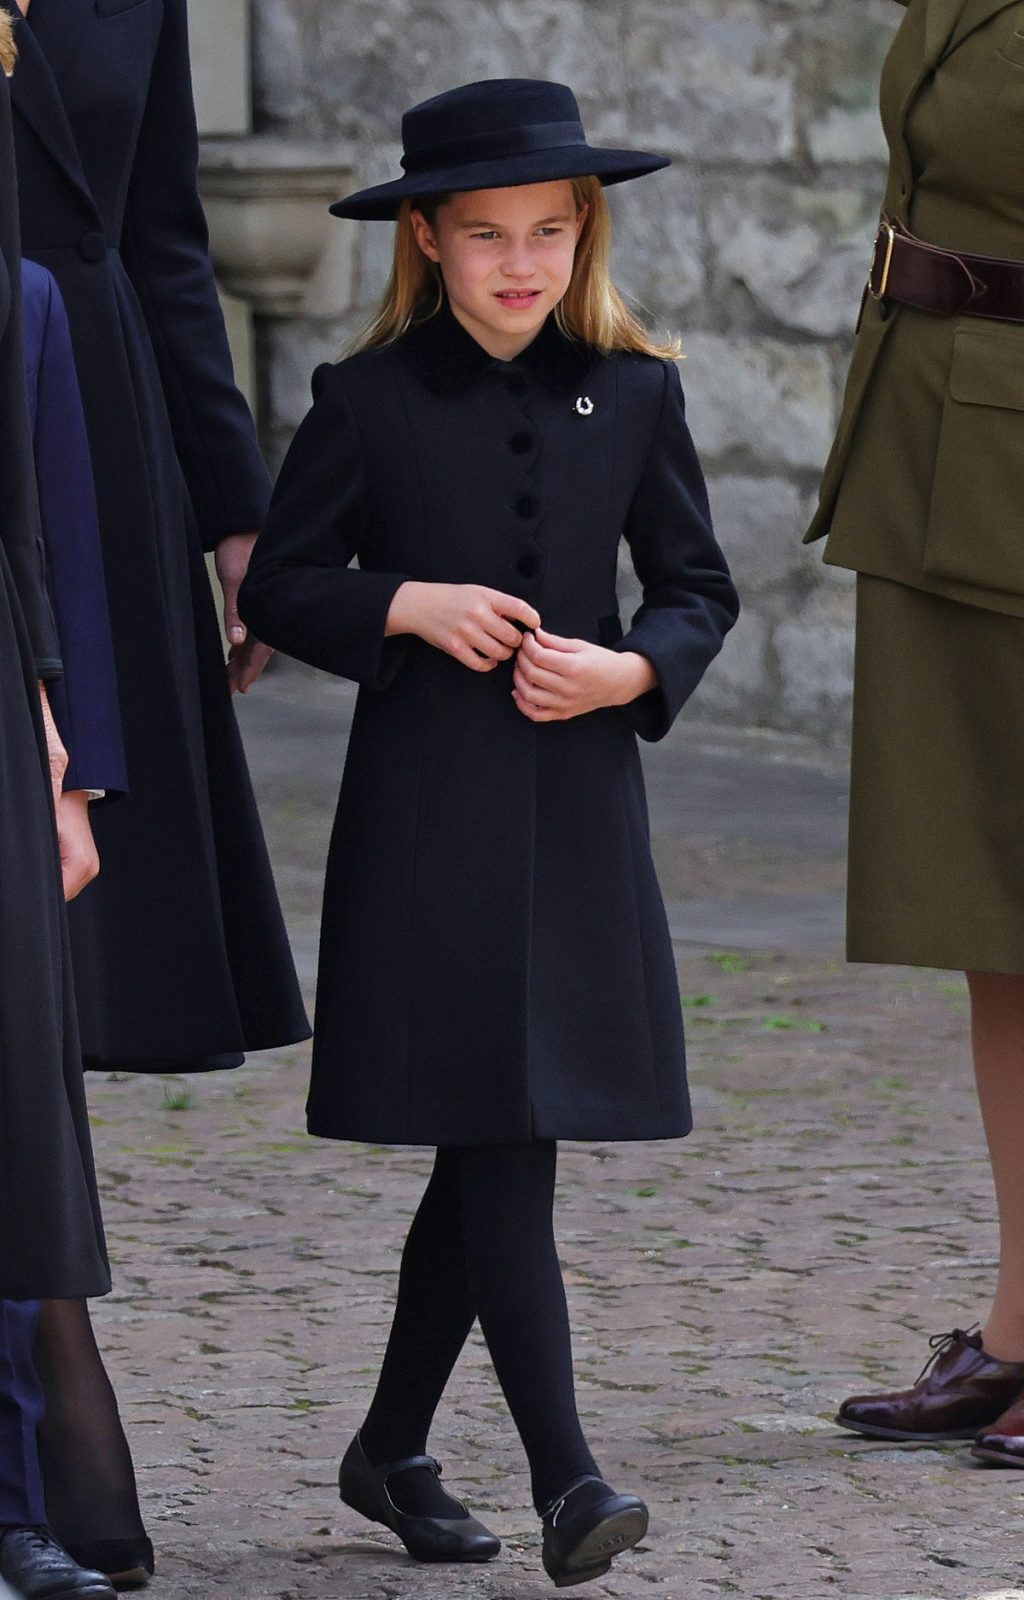 Princess Charlotte wears an accessory in honor of Queen Elizabeth II at her funeral |  fashion beauty